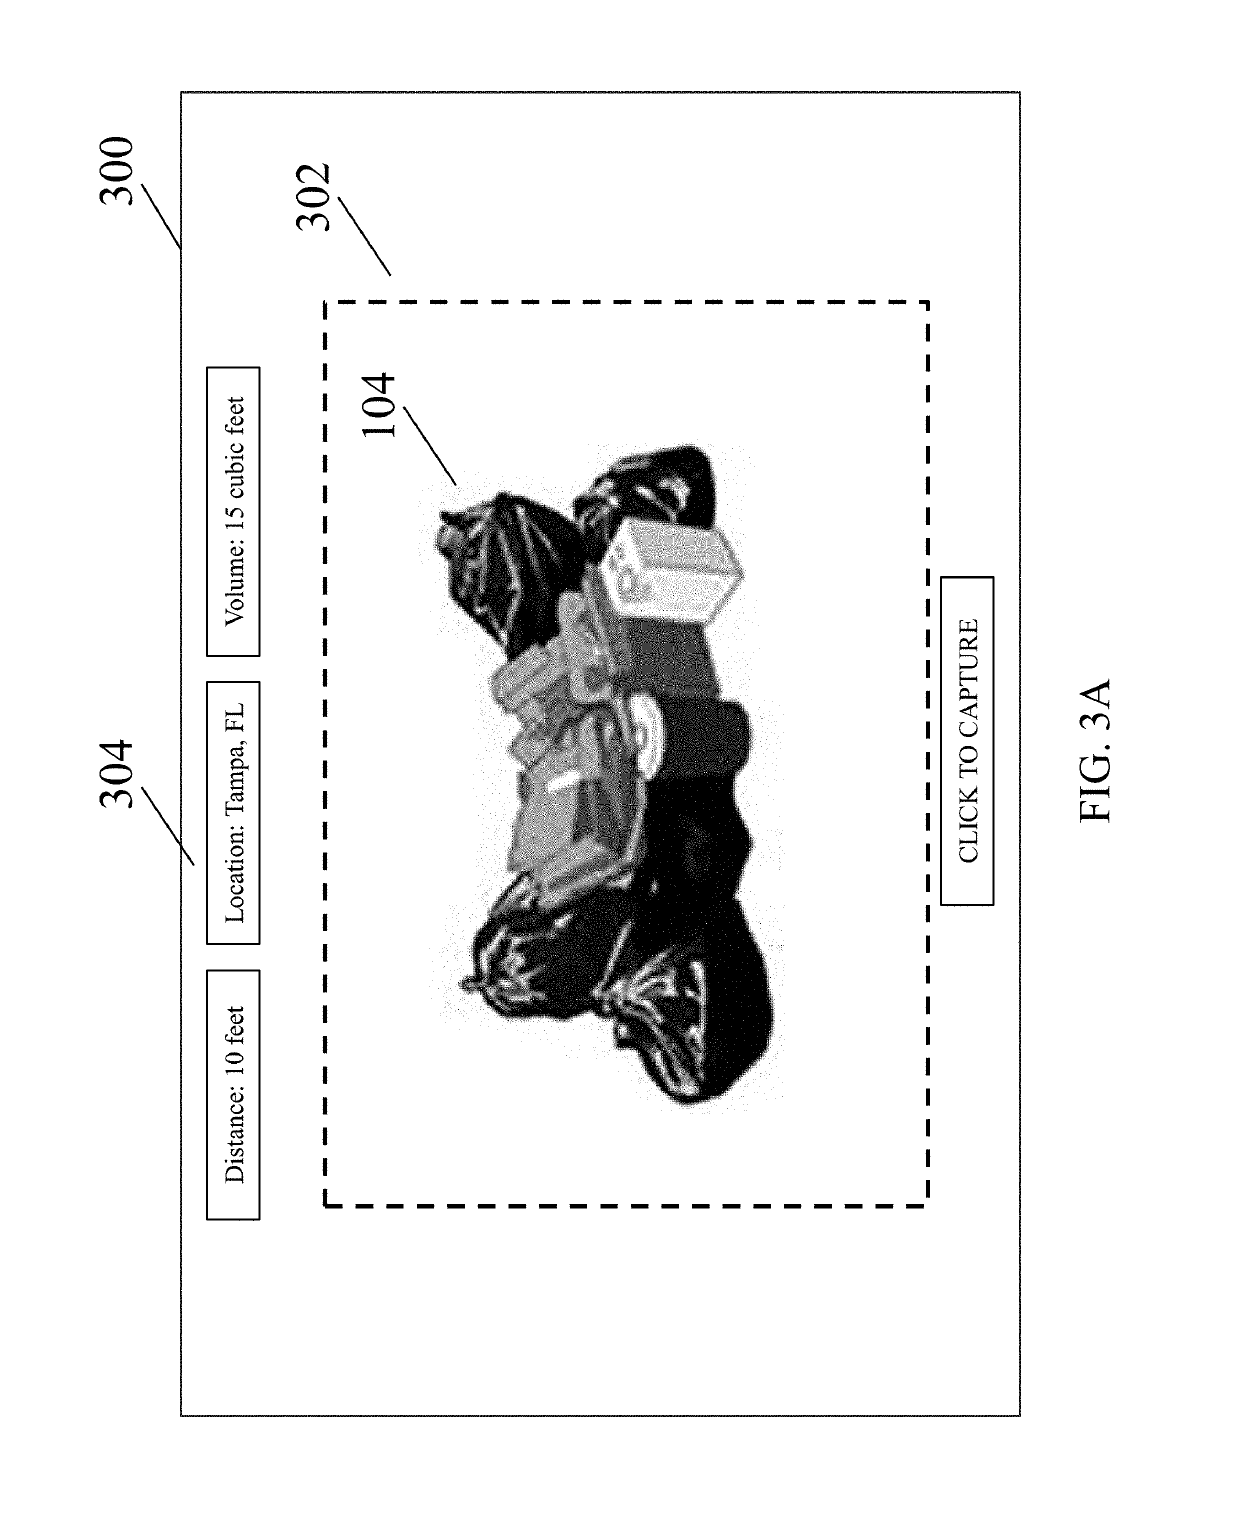 Systems and methods for object identification and pricing for waste removal and transport services